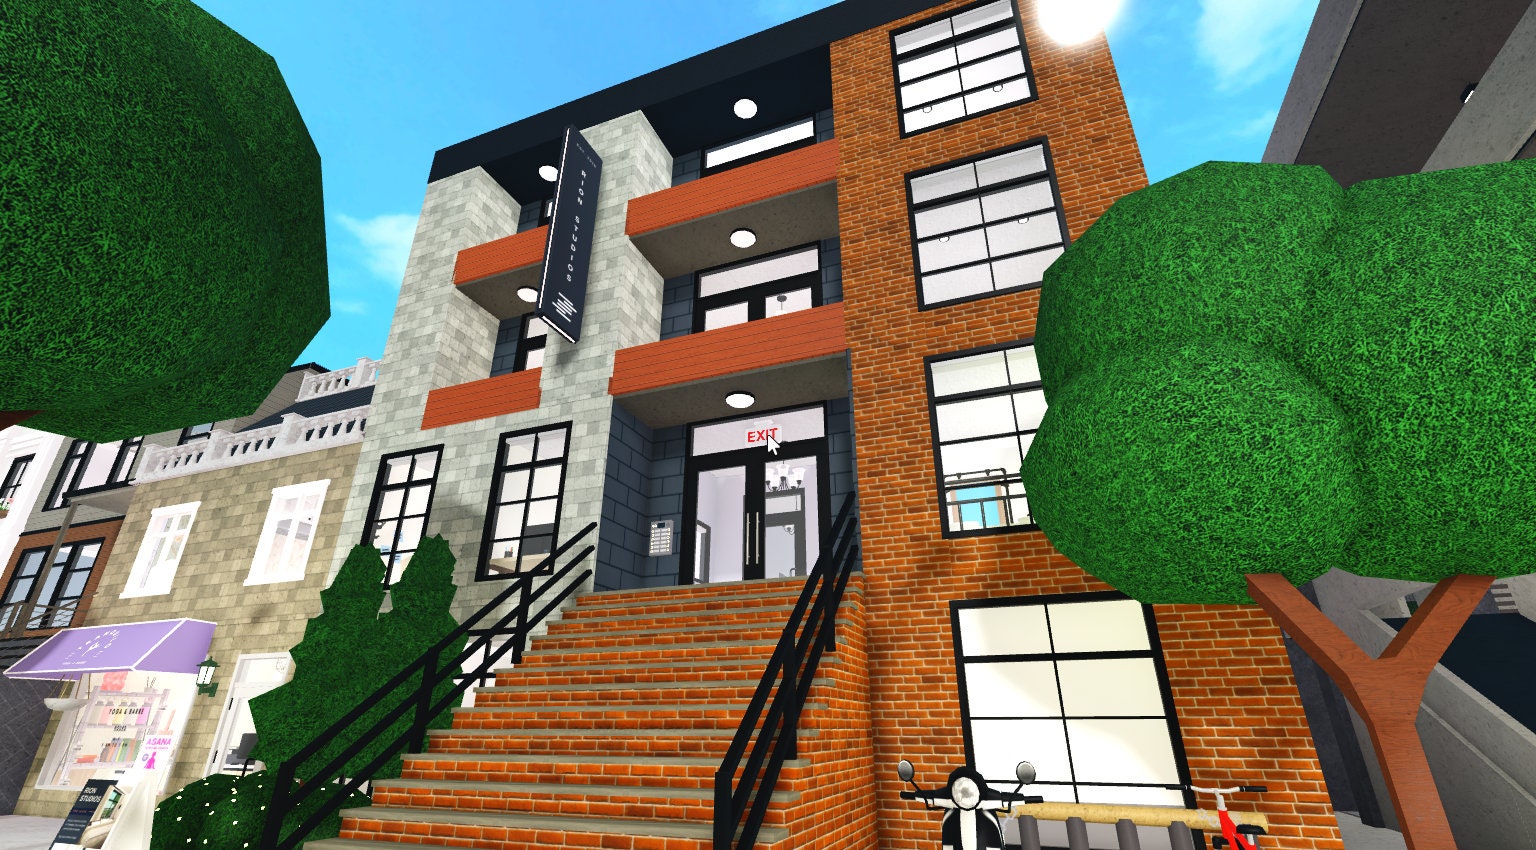 How to Build a House in Welcome to Bloxburg on Roblox